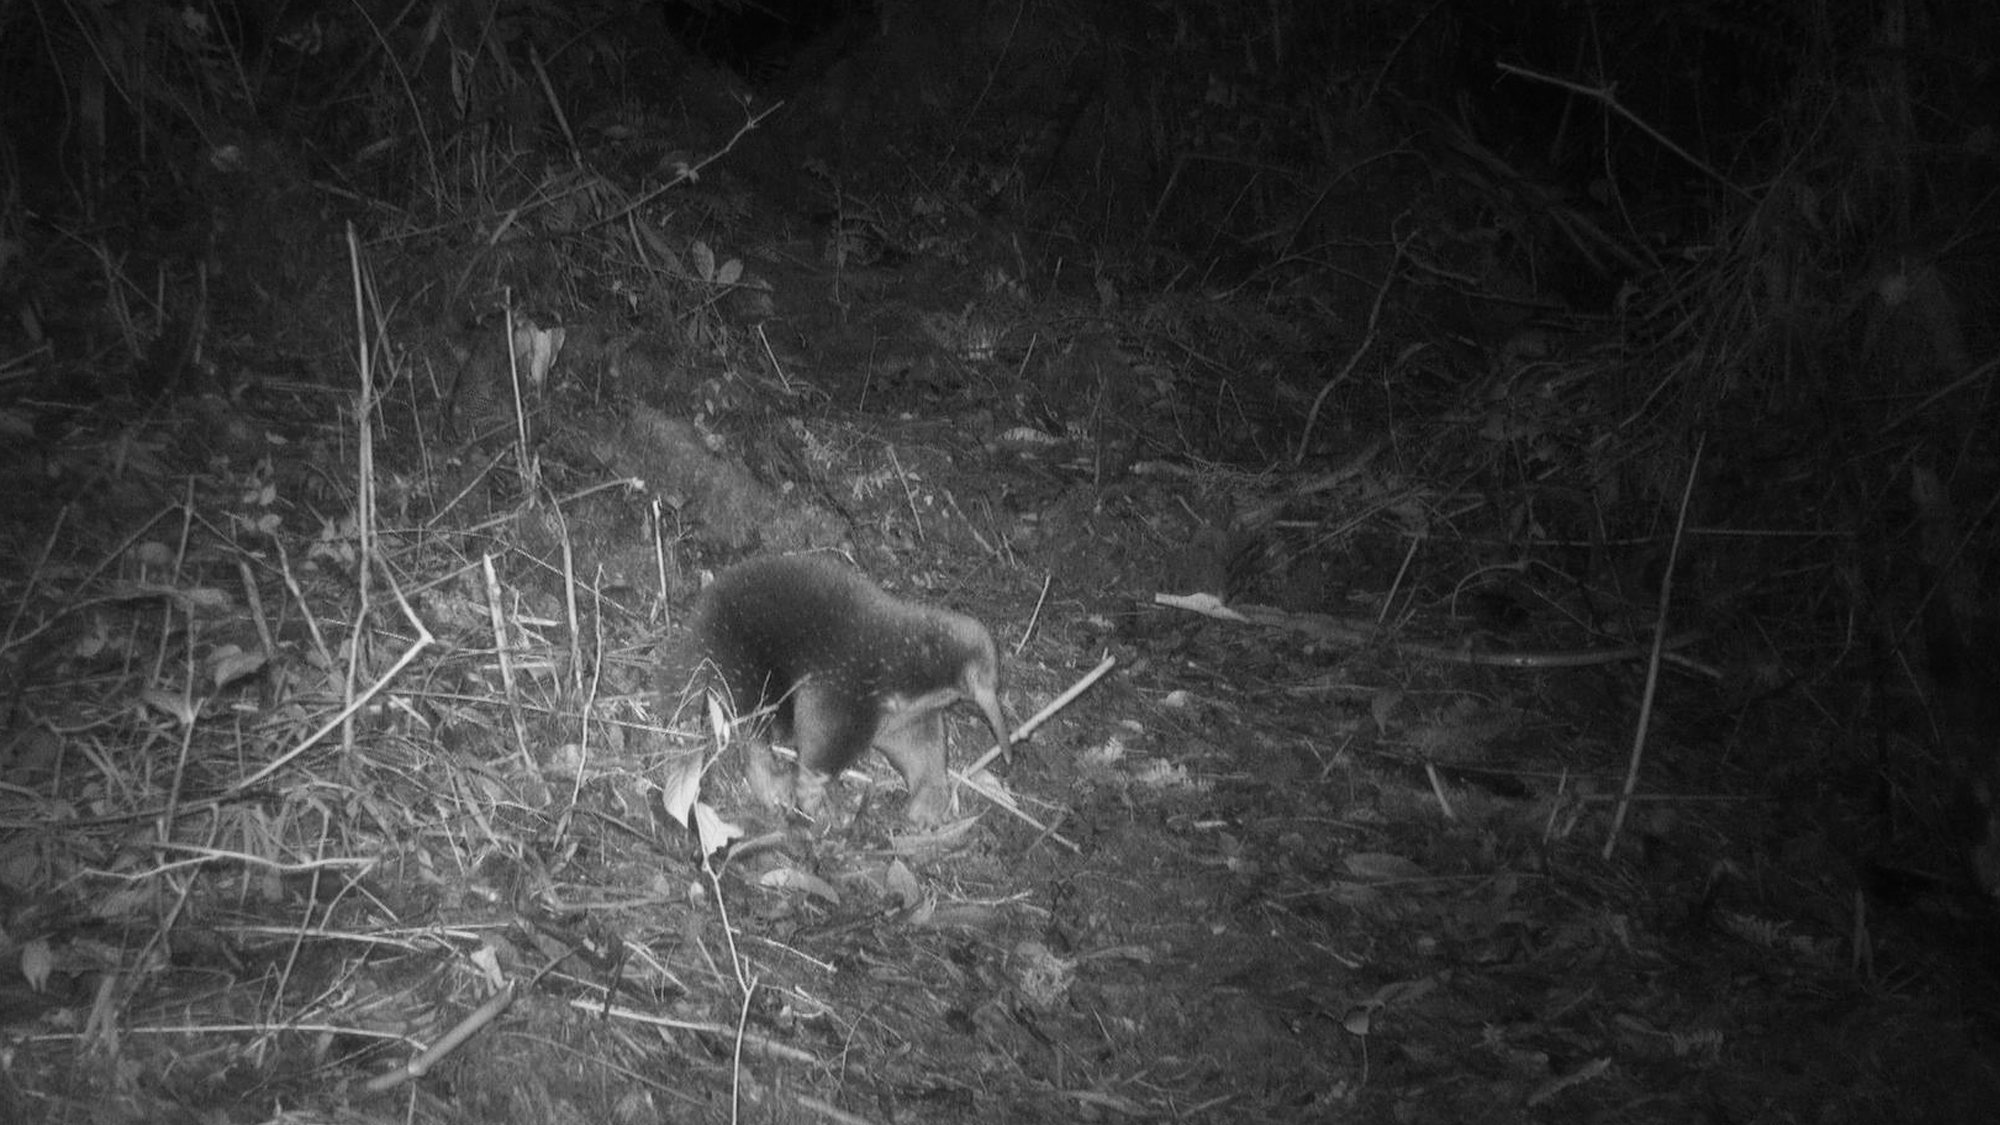 Elusive egg-laying mammal caught on digicam for the primary time